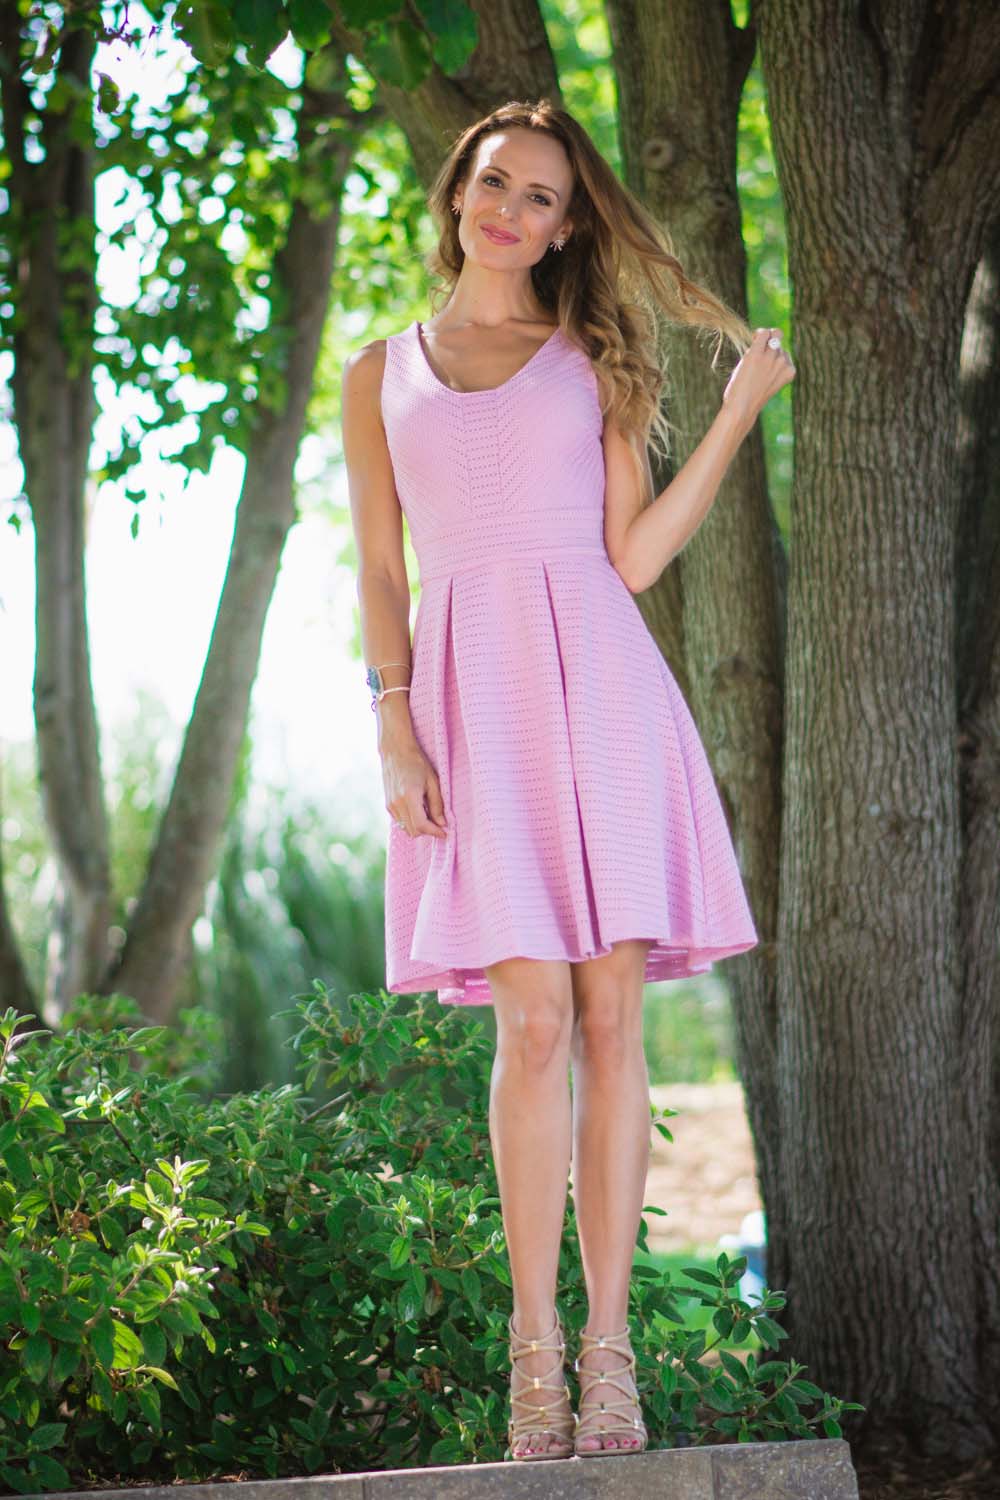 The Perfect Fit & Flare Dress for Summer